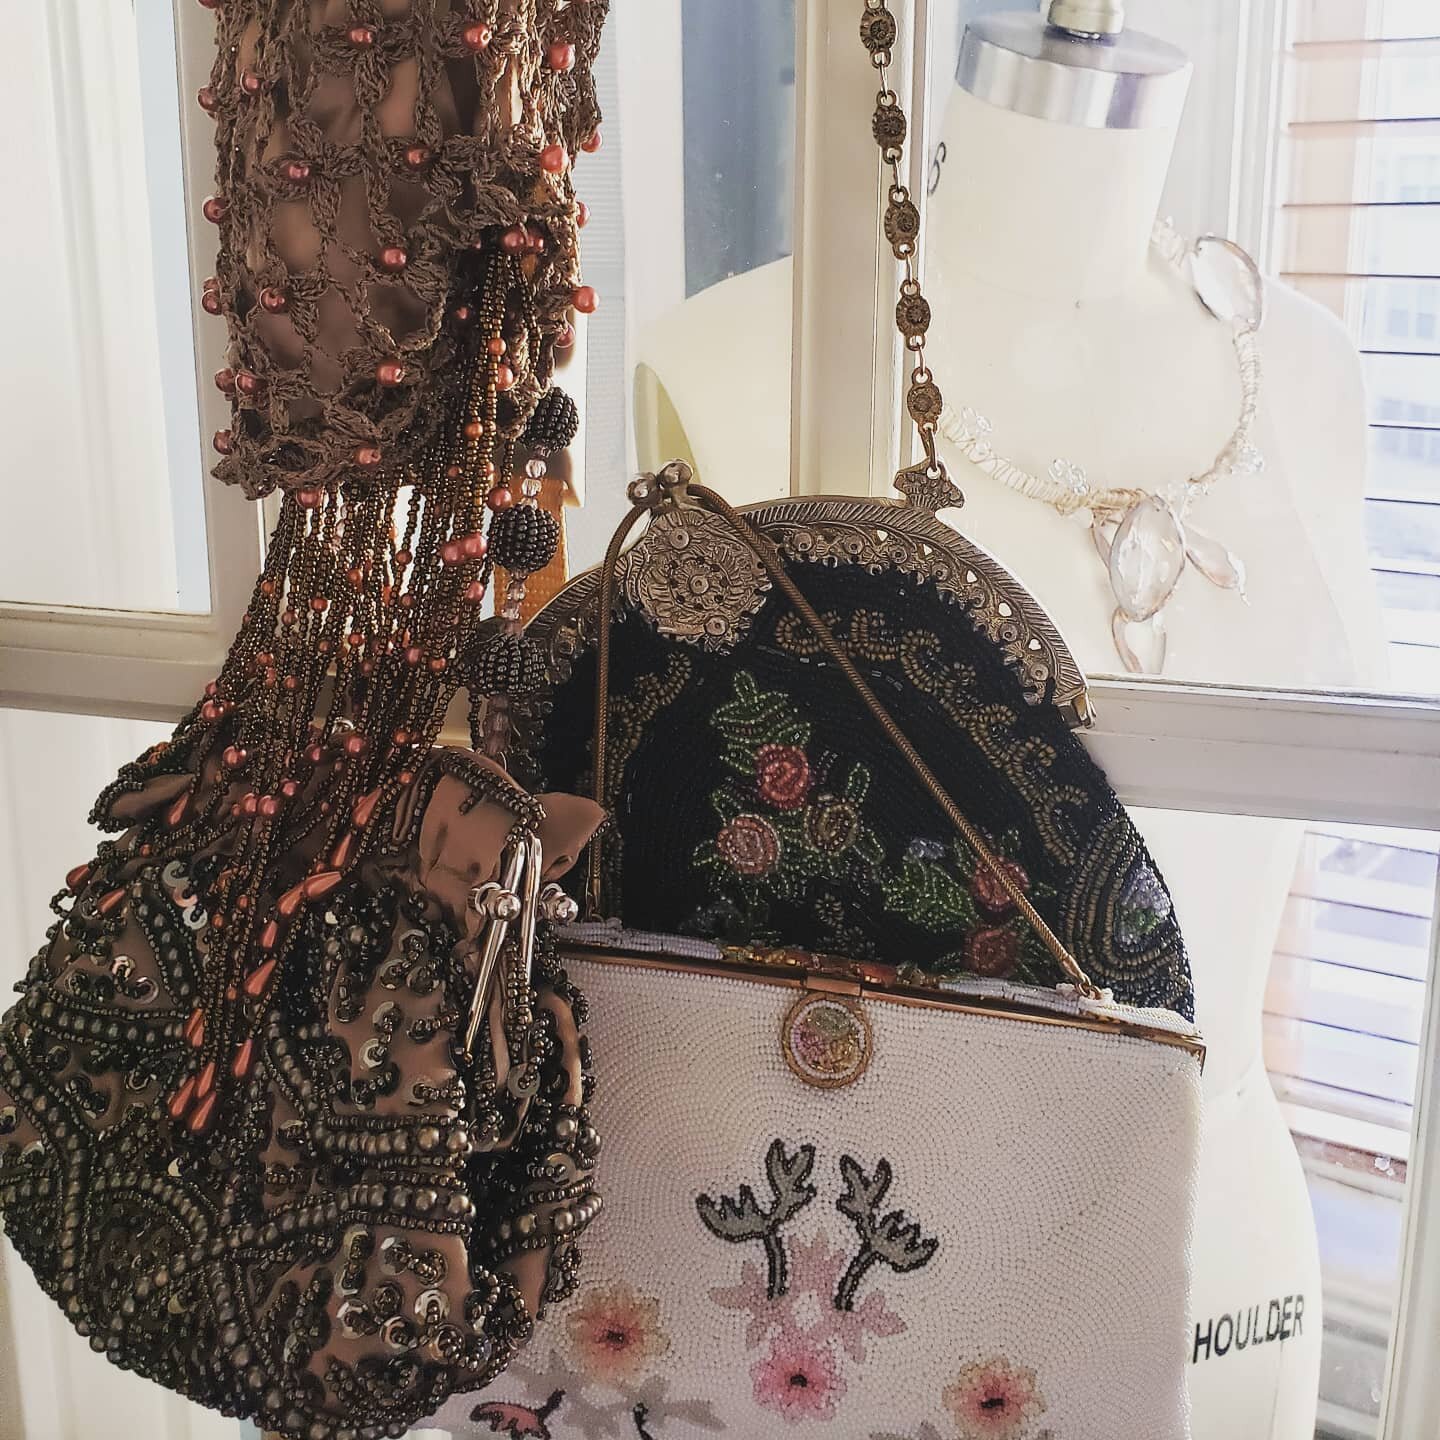 Using a #StillLife in which I've mixed my #vintagehandbag collection with my dear late Grandma's bags &amp; hats to decorate a new space. They're #TooPretty to hide in boxes.